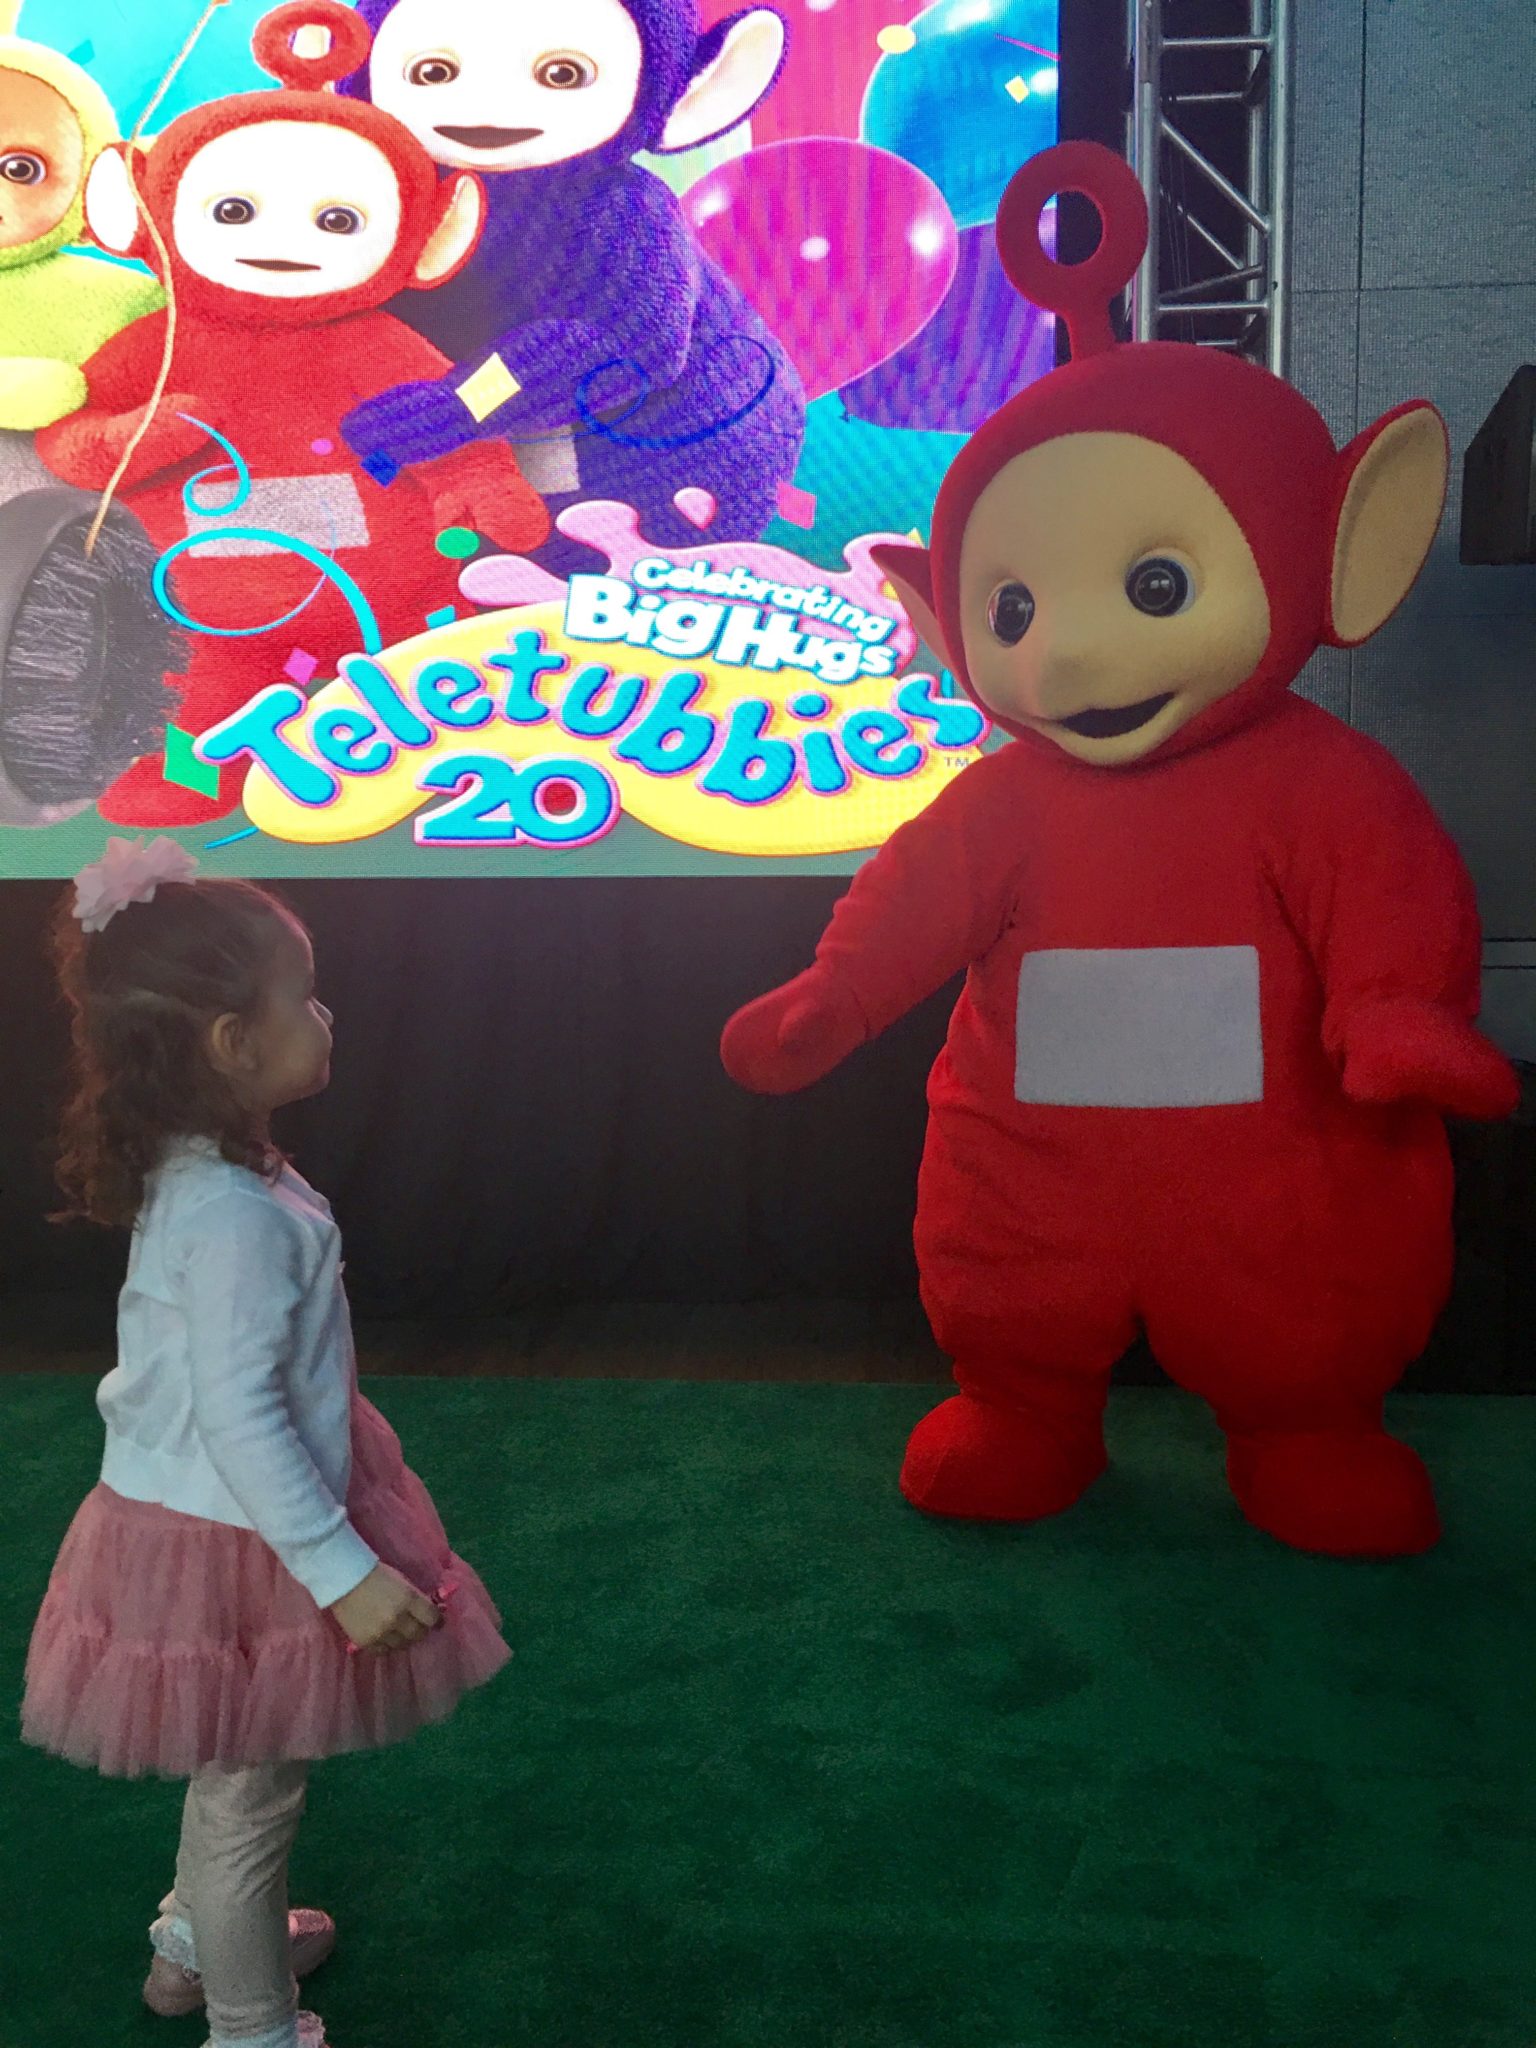 Teletubbies returned to NYC to celebrate their 2oth Anniversary! Can you believe these huggable Tubbies have been around for 20 years? See how we celebrated